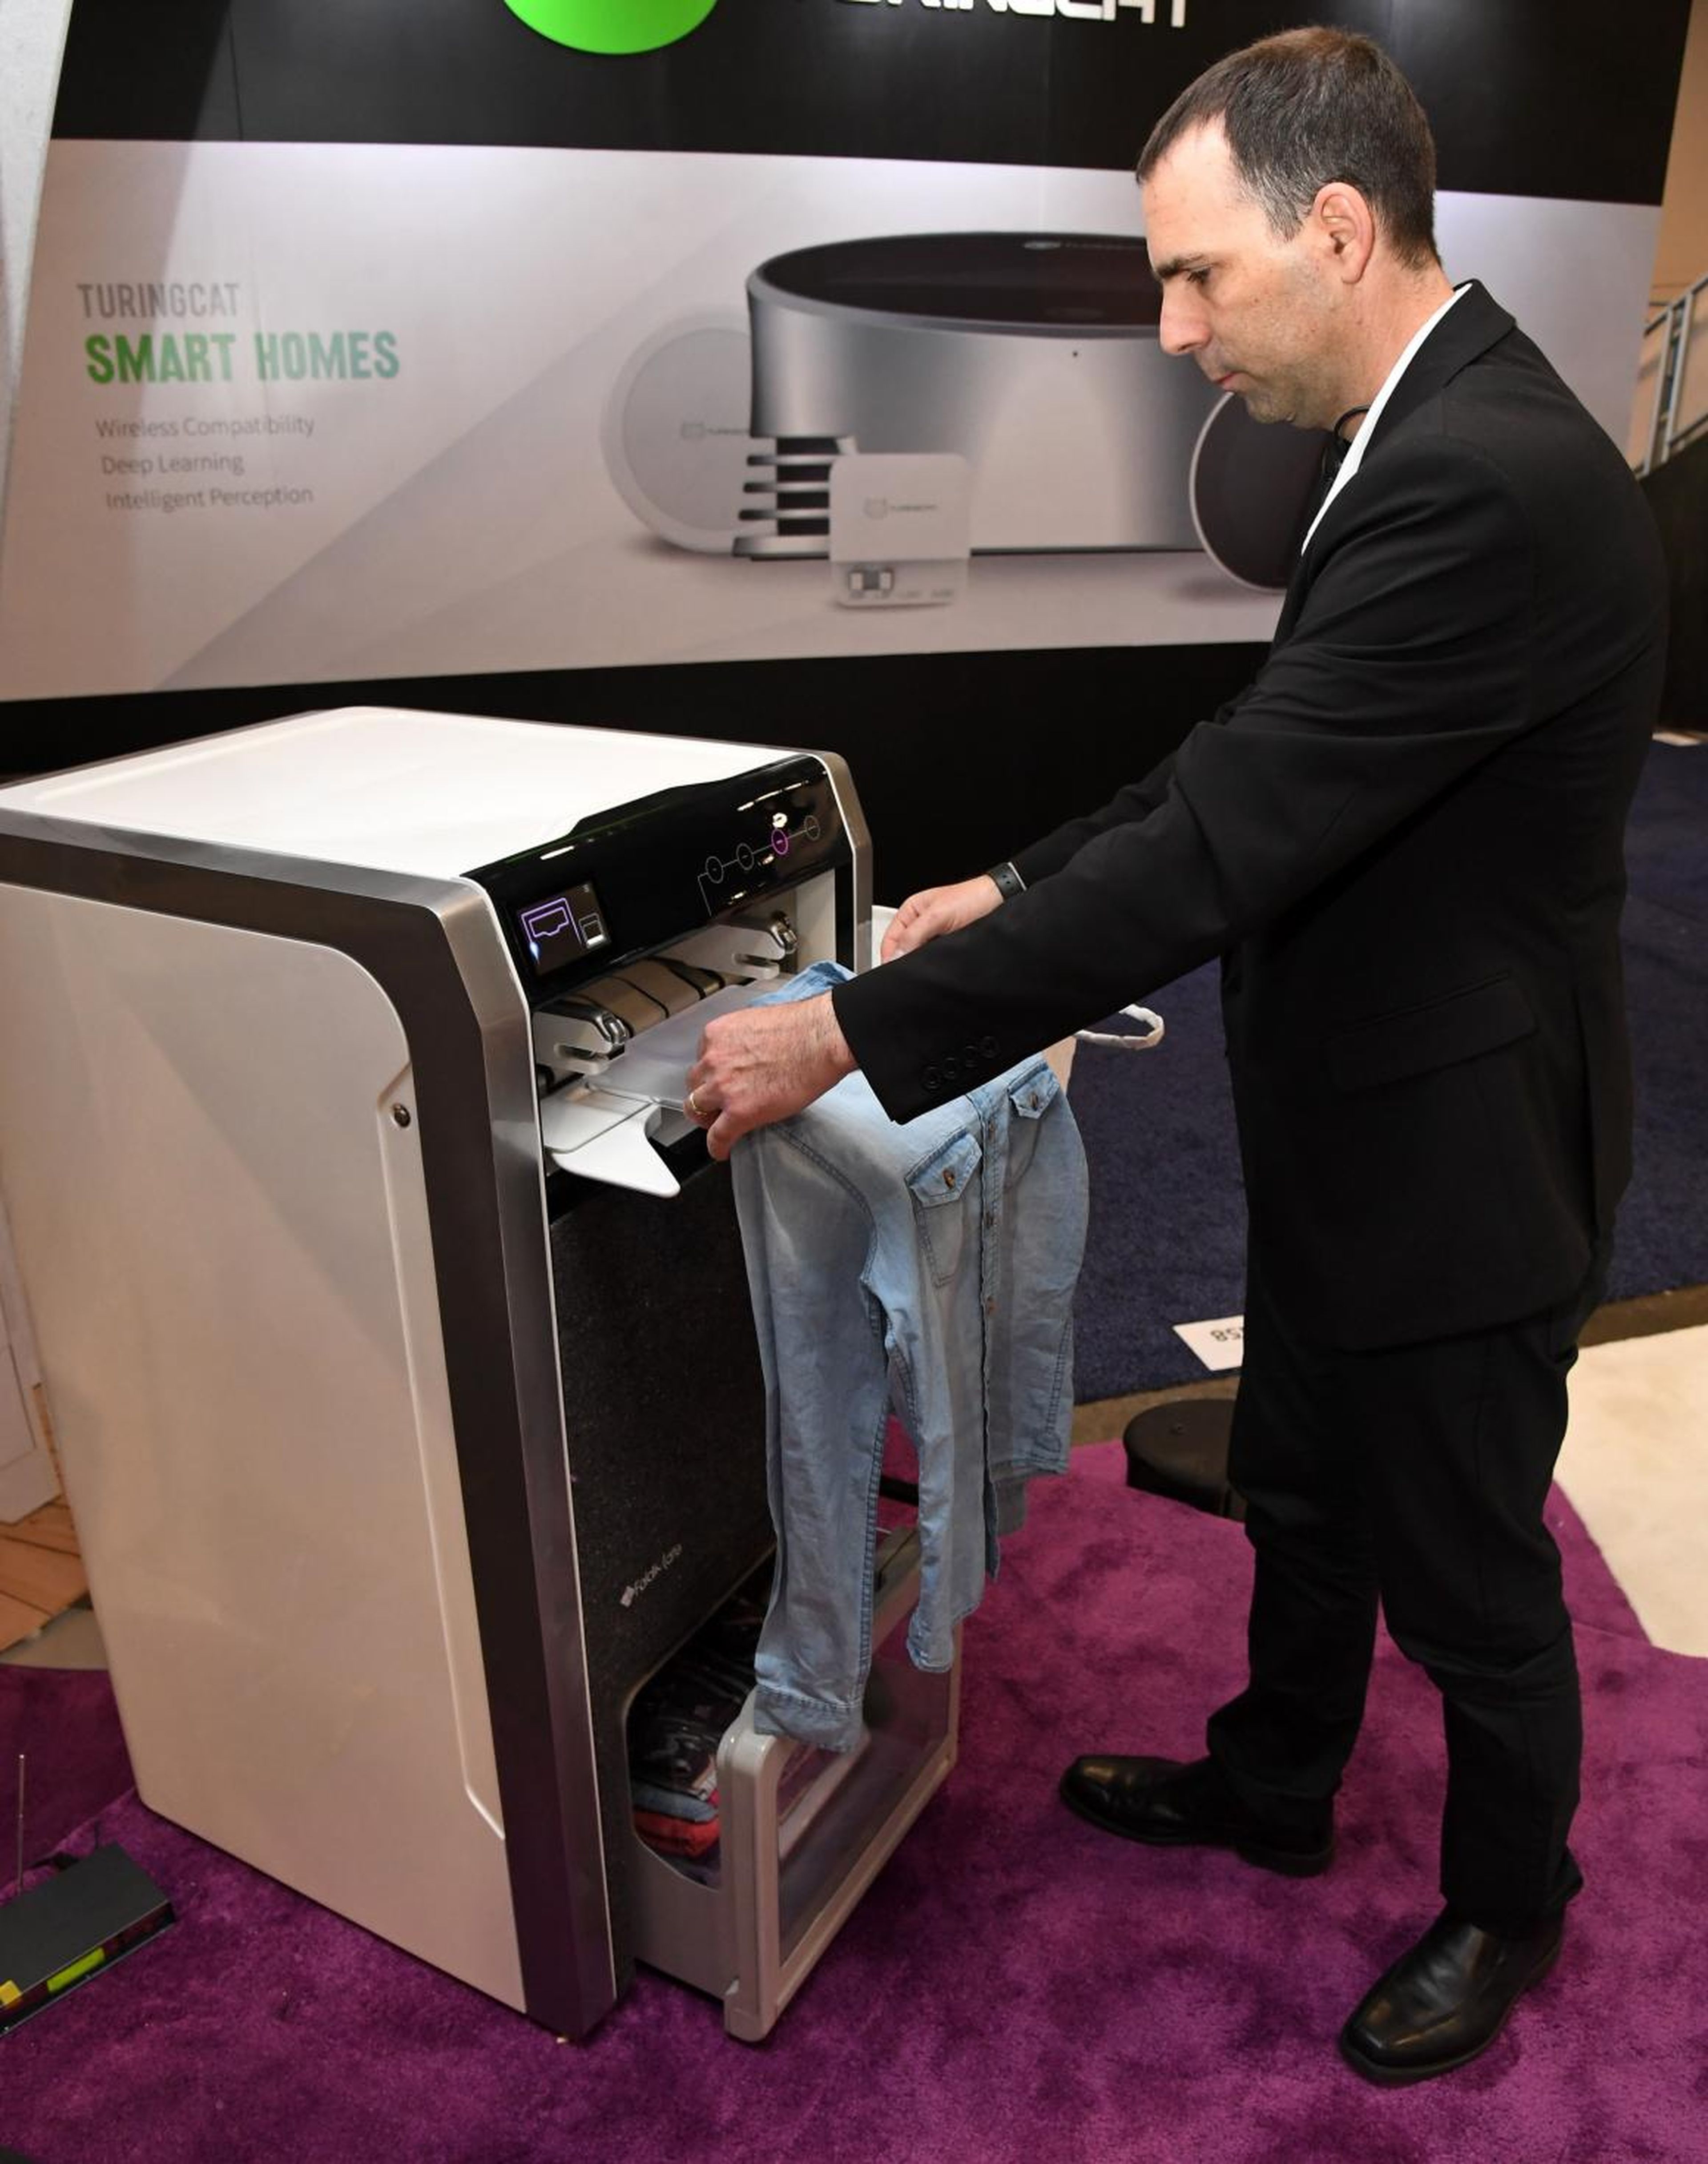 A robotic laundry folding machine by FoldiMate can fold a load of laundry in under four minutes.